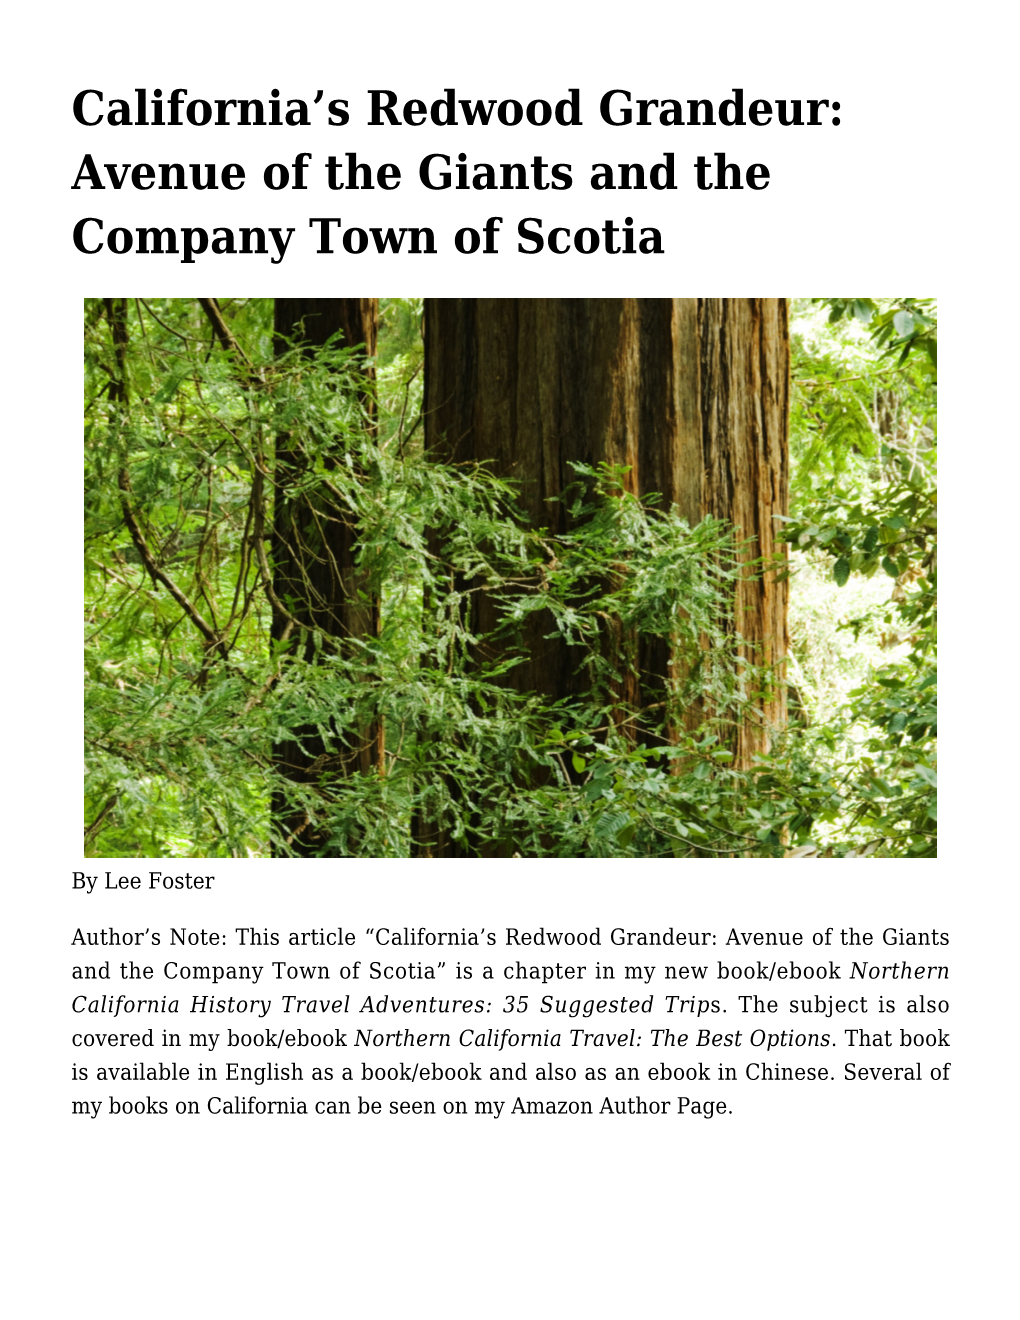 California's Redwood Grandeur: Avenue of the Giants and the Company Town of Scotia